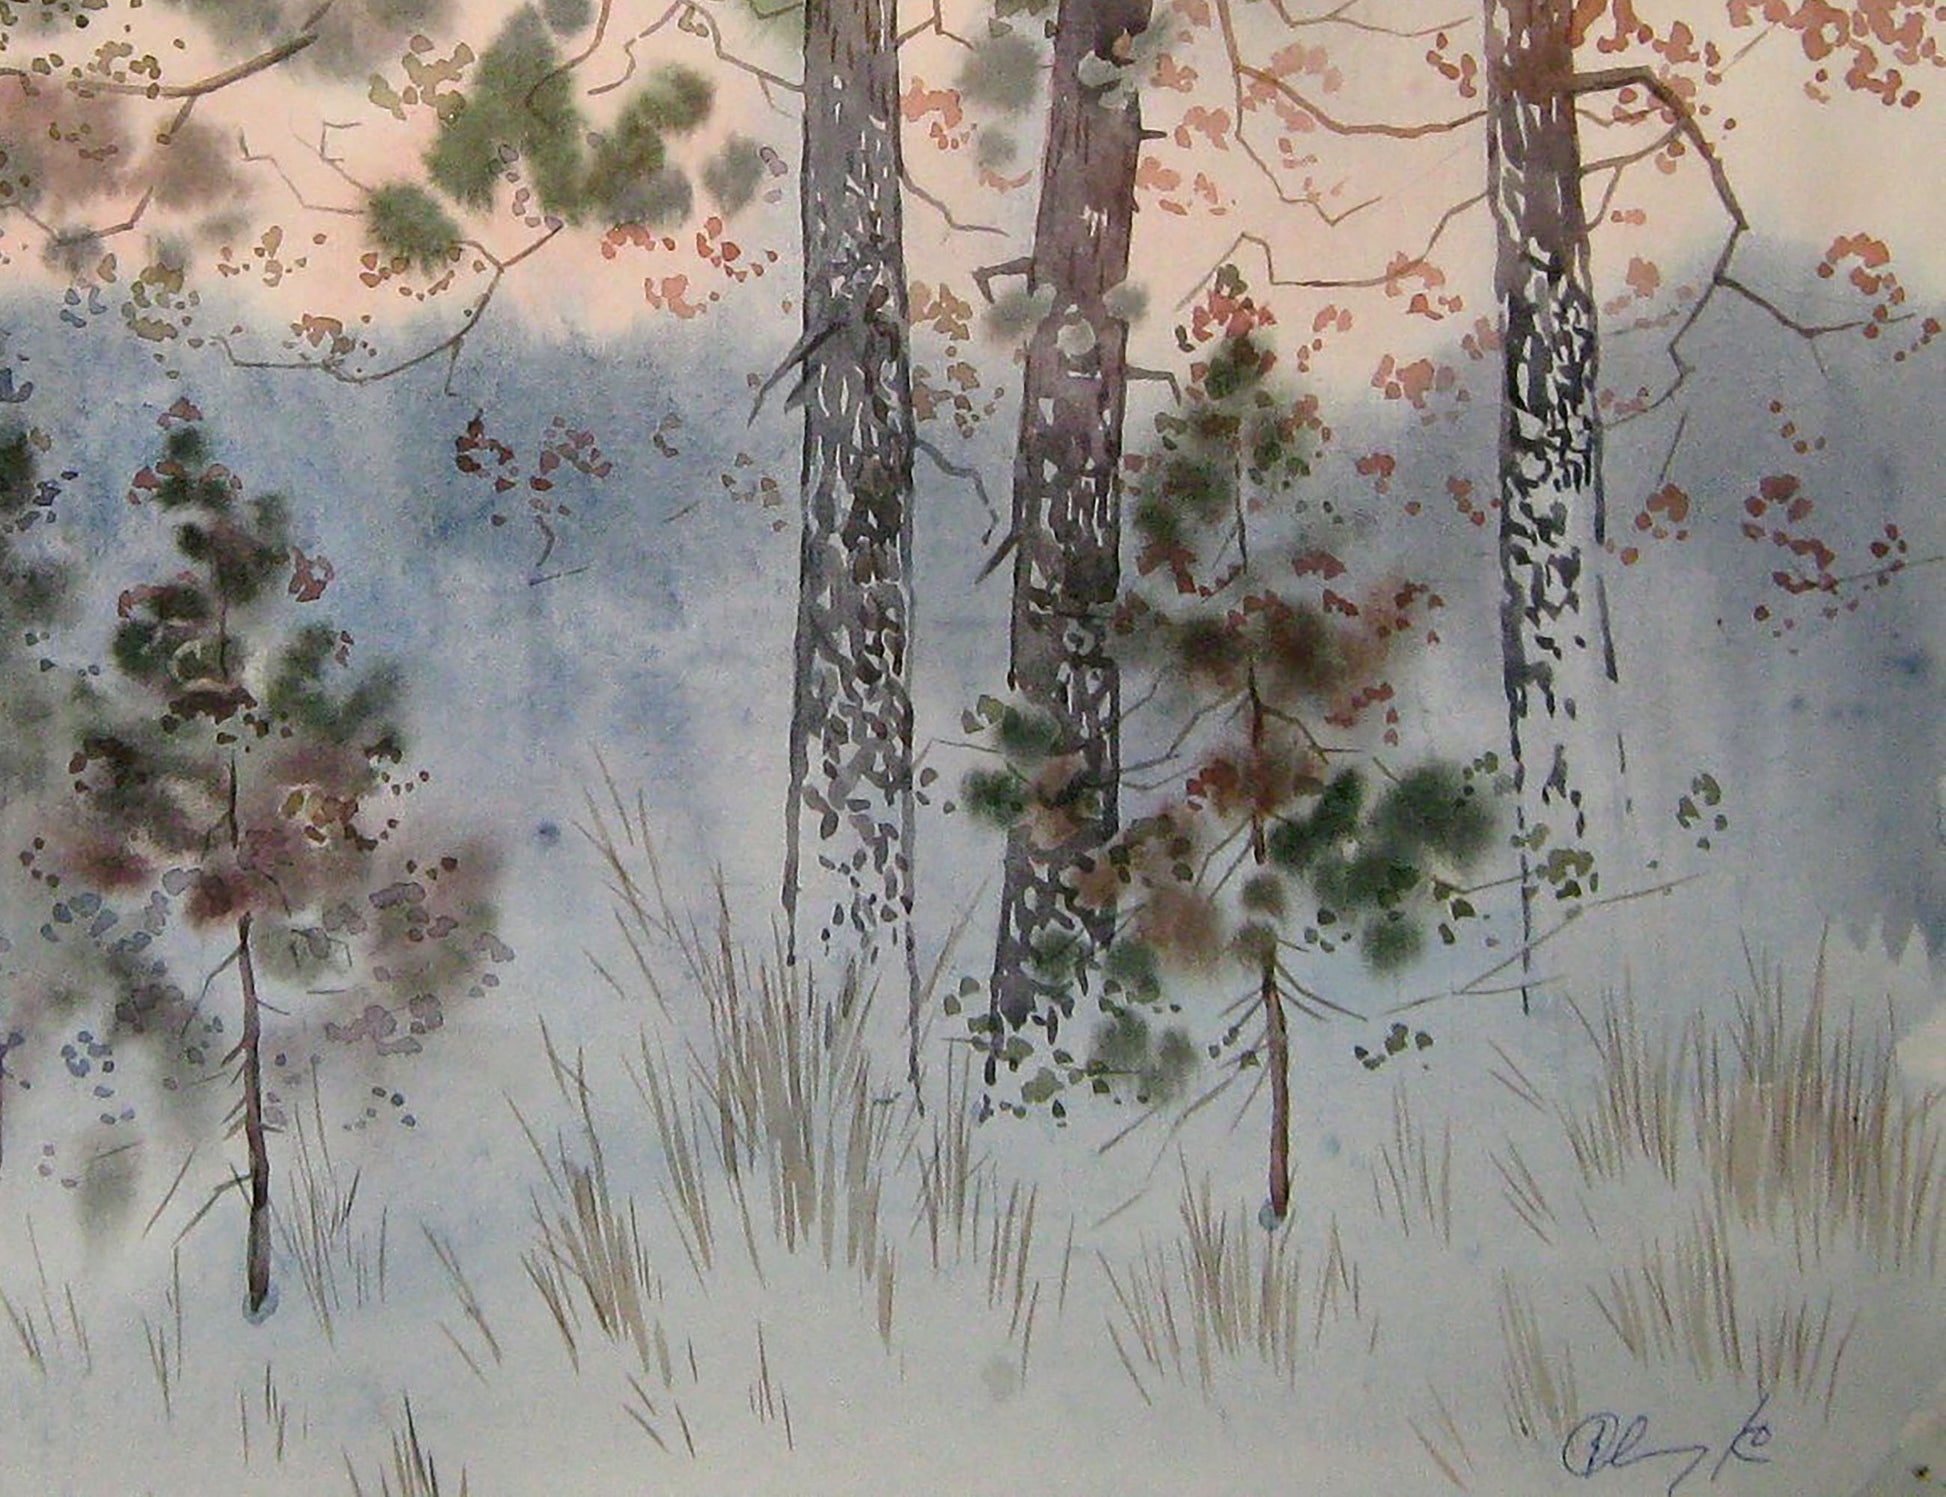 The watercolor piece "Misty Winter Forest" by Valery Savenets